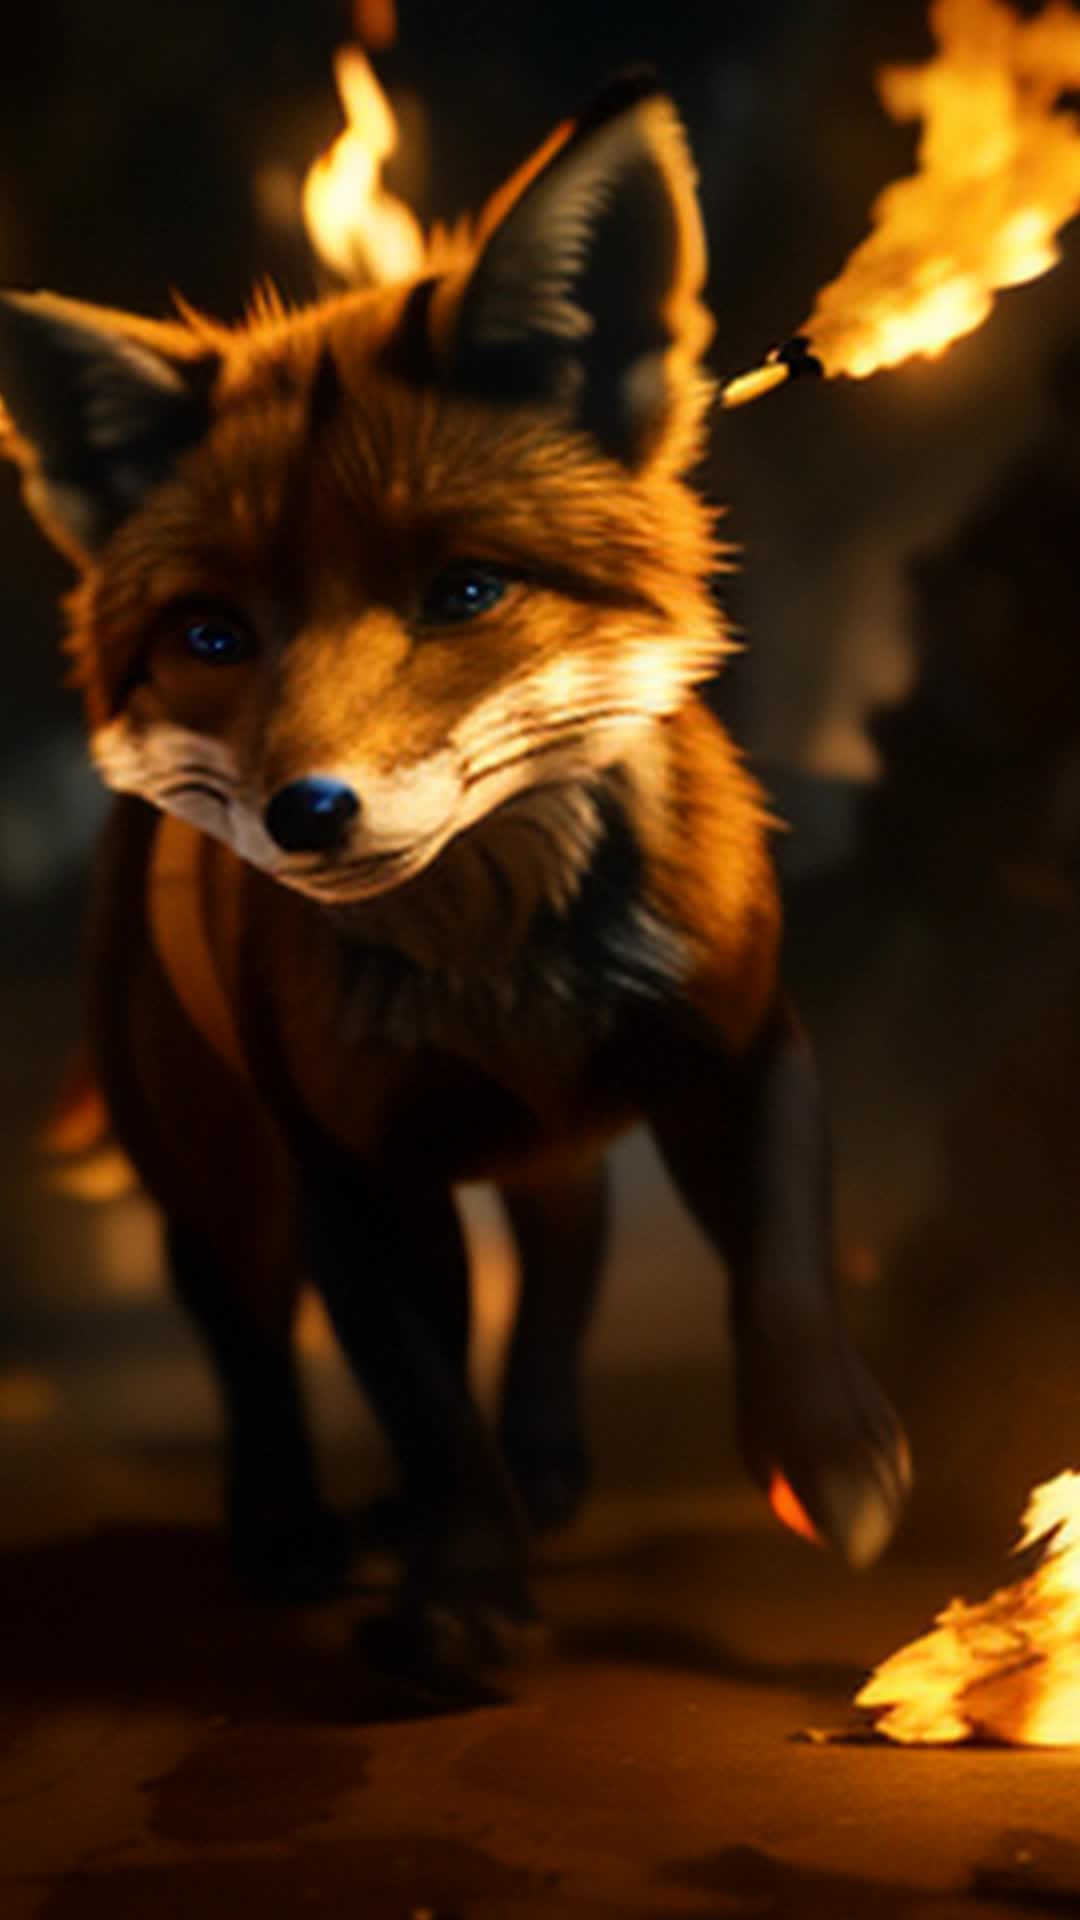 Agile fox darting among humans, delivering messages, critical hot spots highlighted, intense focus, smoky atmosphere, dynamic, real-time strategy, sharp focus, urgent movement, soft shadows cast by fire glow, wide-angle view